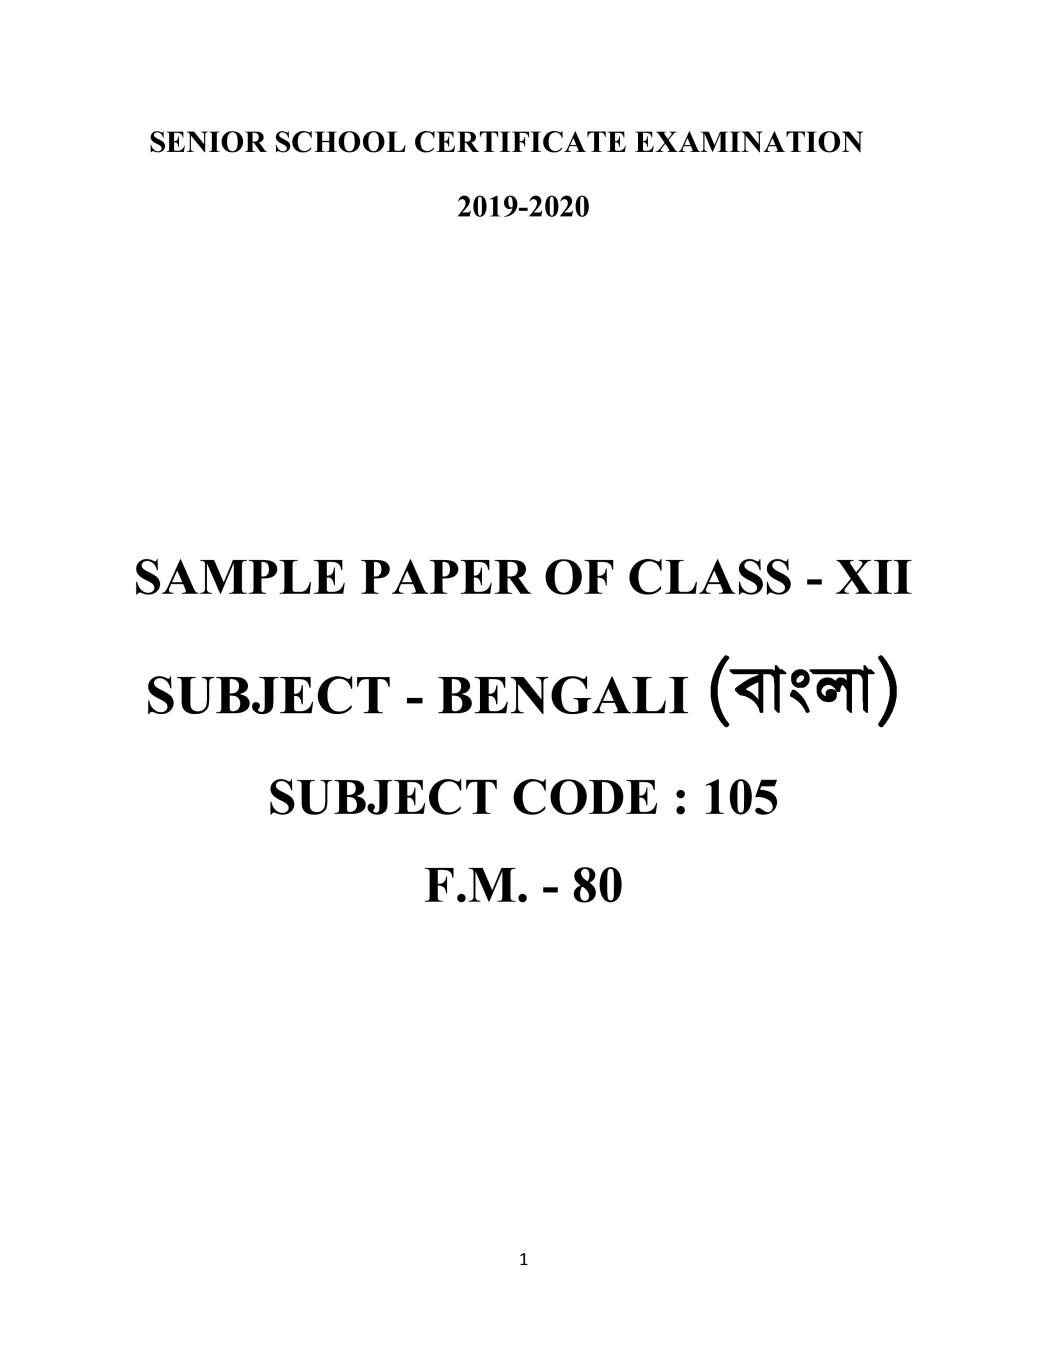 CBSE Class 12 Sample Paper 2020 for Bengali - Page 1